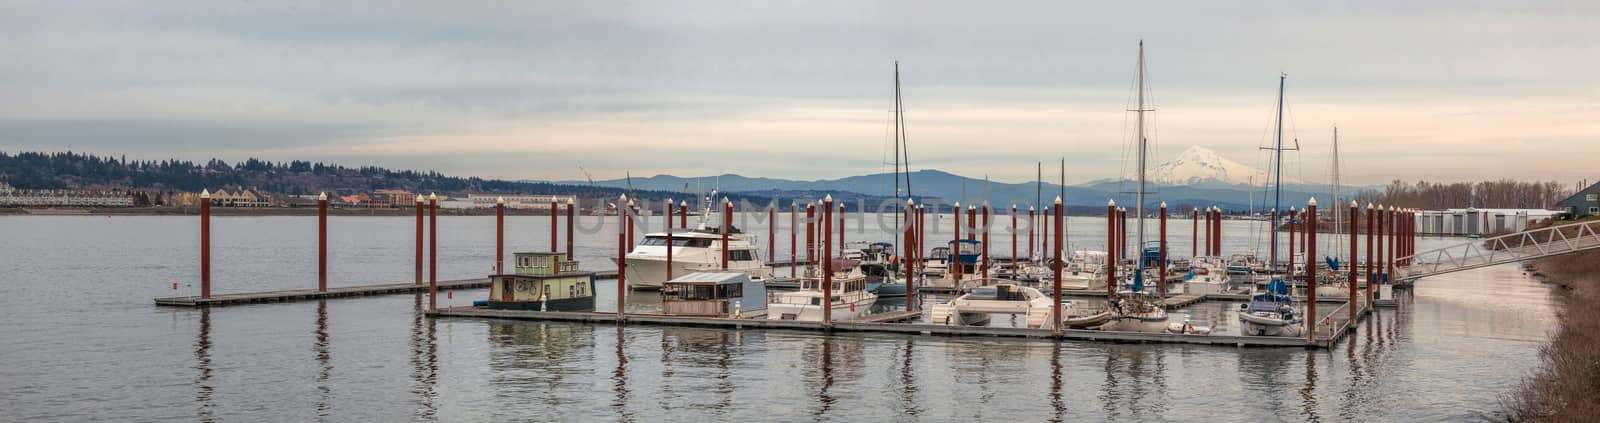 Marina on Columbia River Panorama by jpldesigns